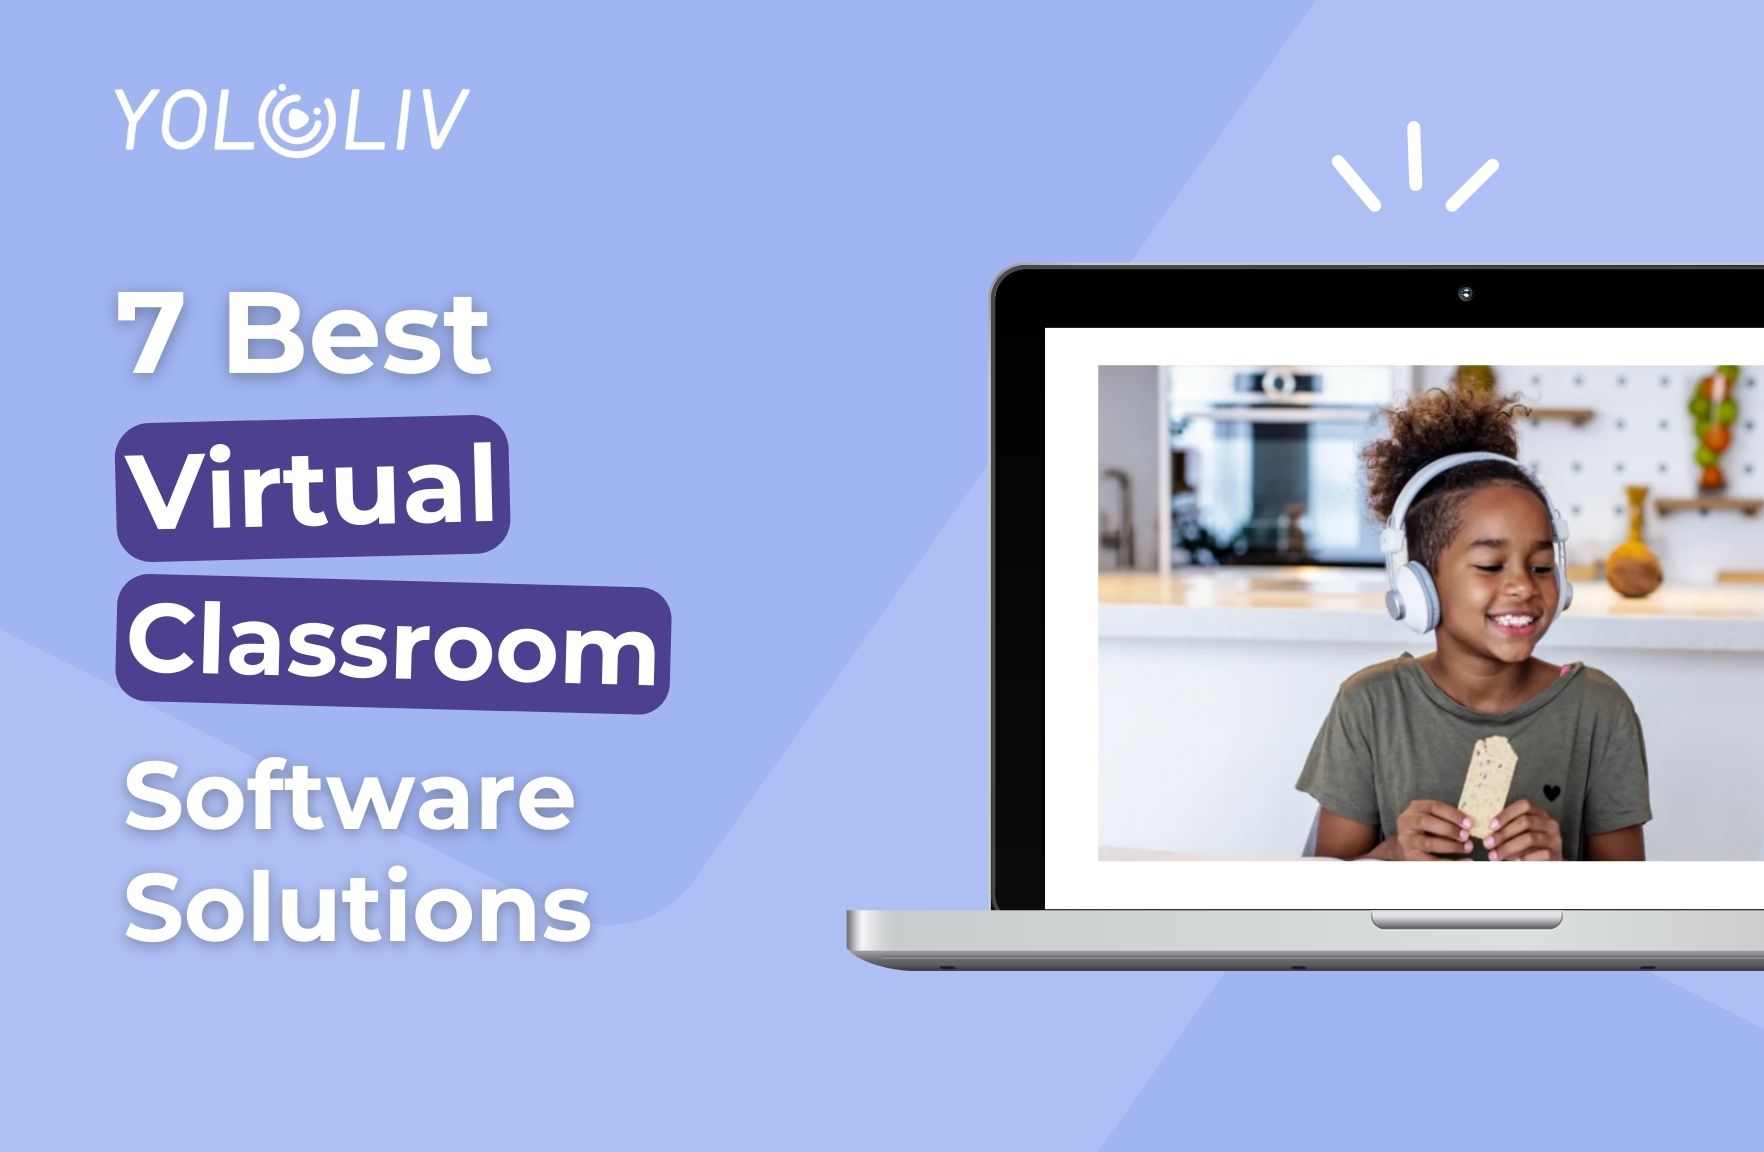 What is a Virtual Classroom? - LearnCube